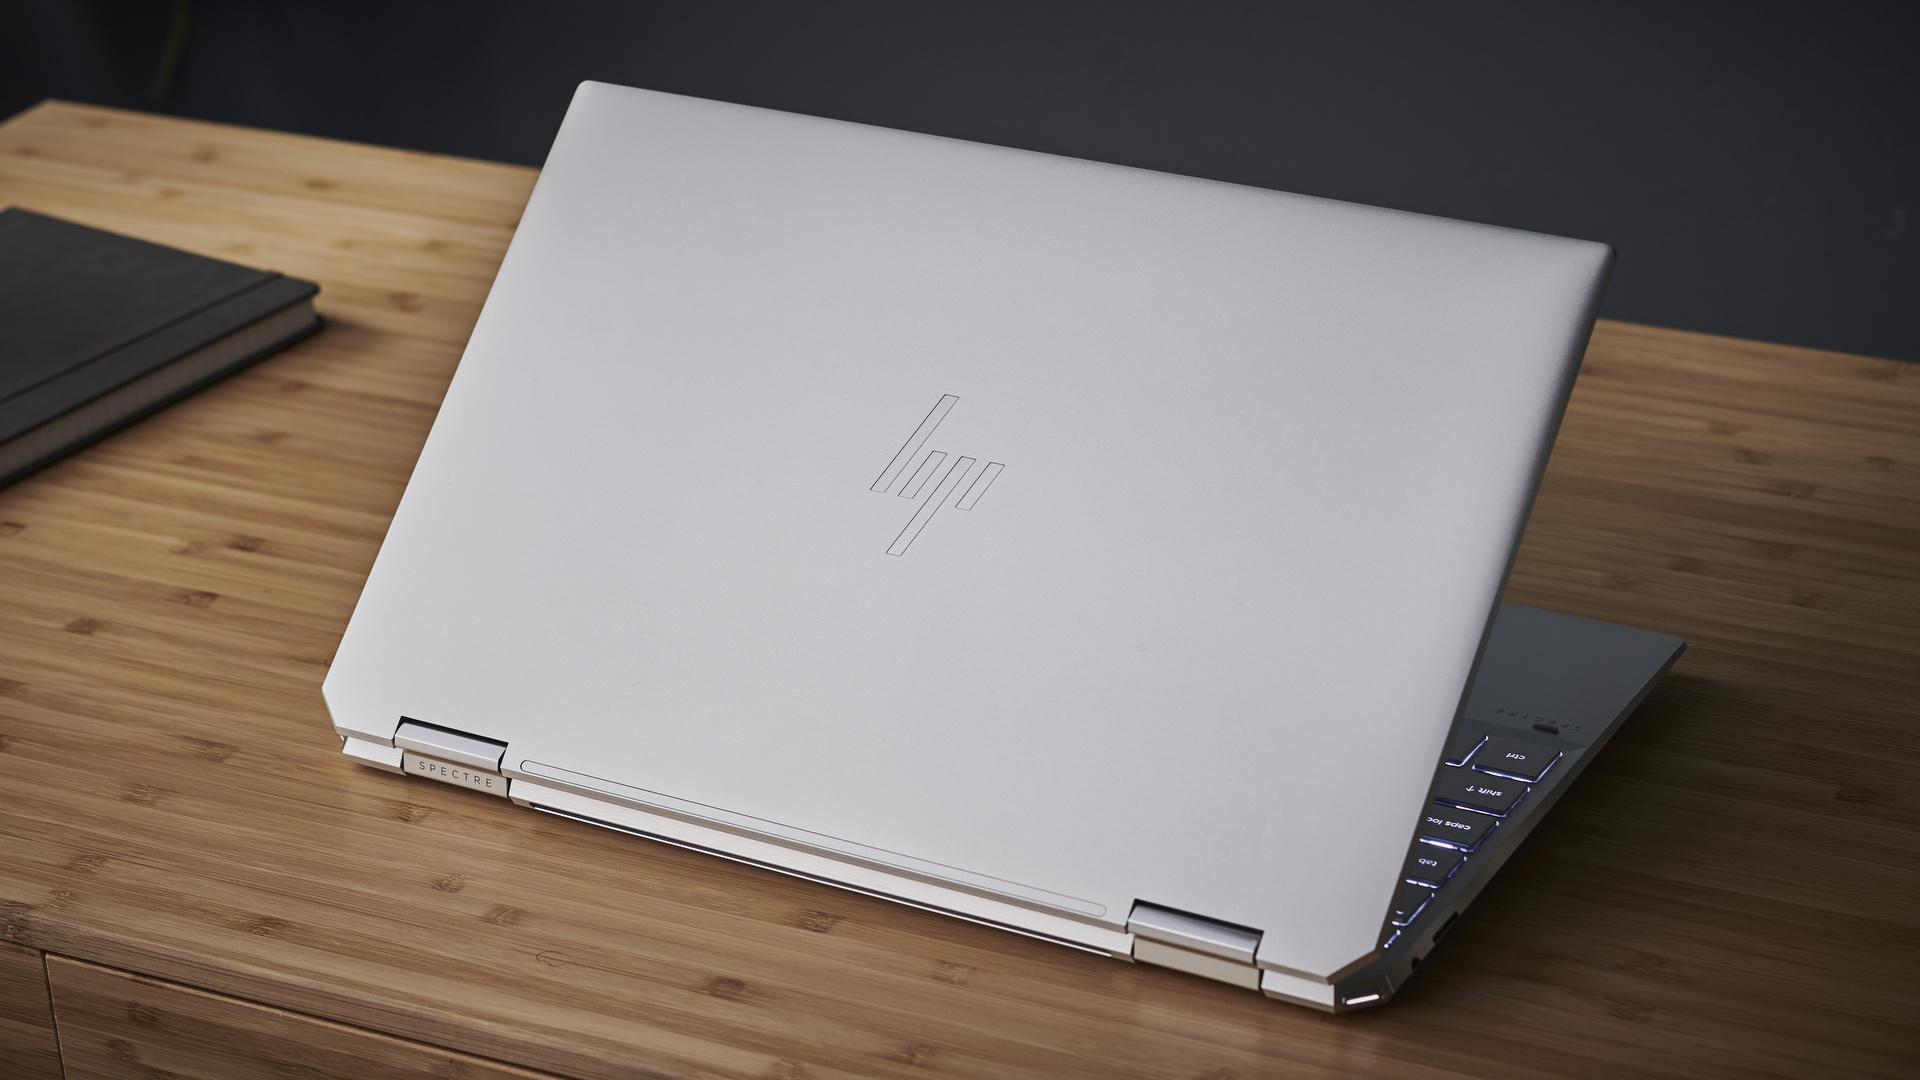 HP Spectre x360 (2021) on a wooden desk next to a notebook